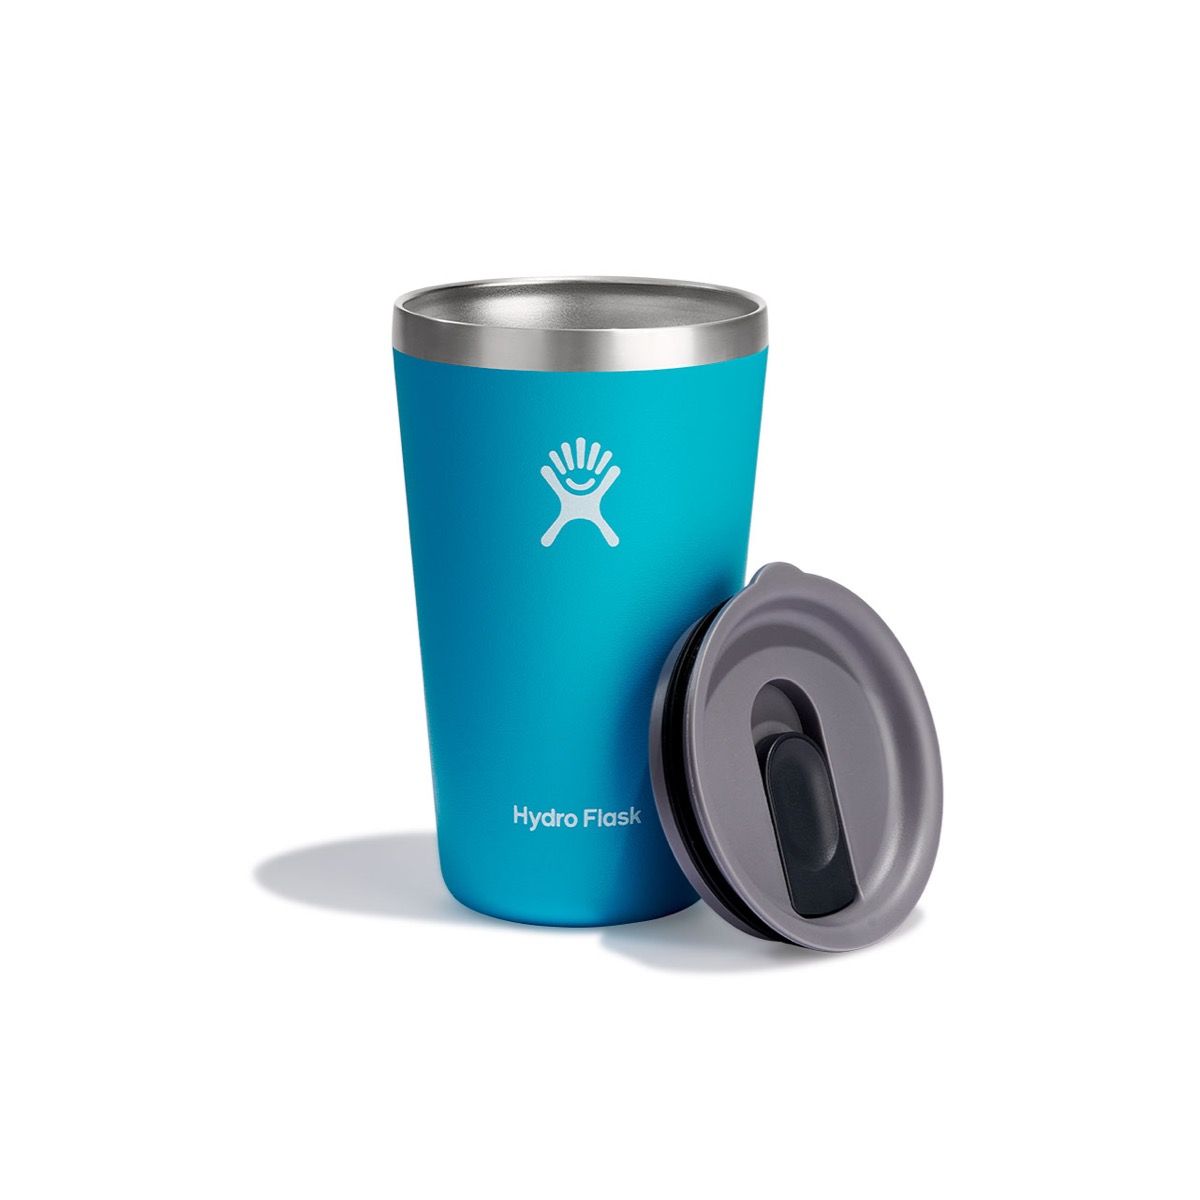 16 oz All Around™ Tumbler — Native Summit Adventure Outfitters